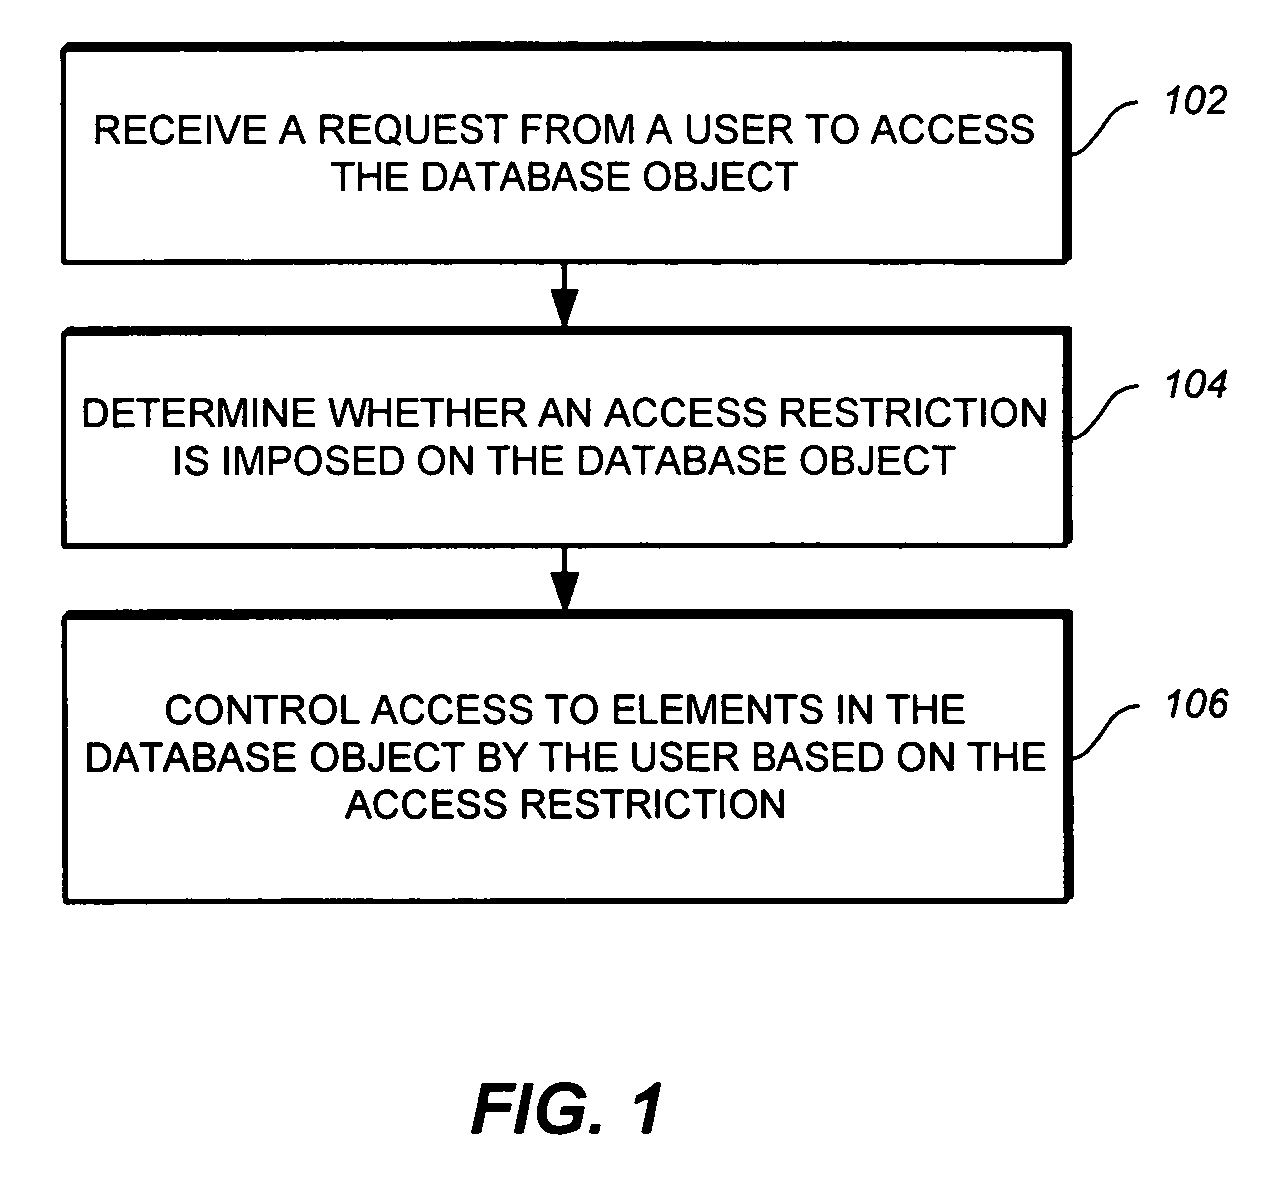 Access control for elements in a database object